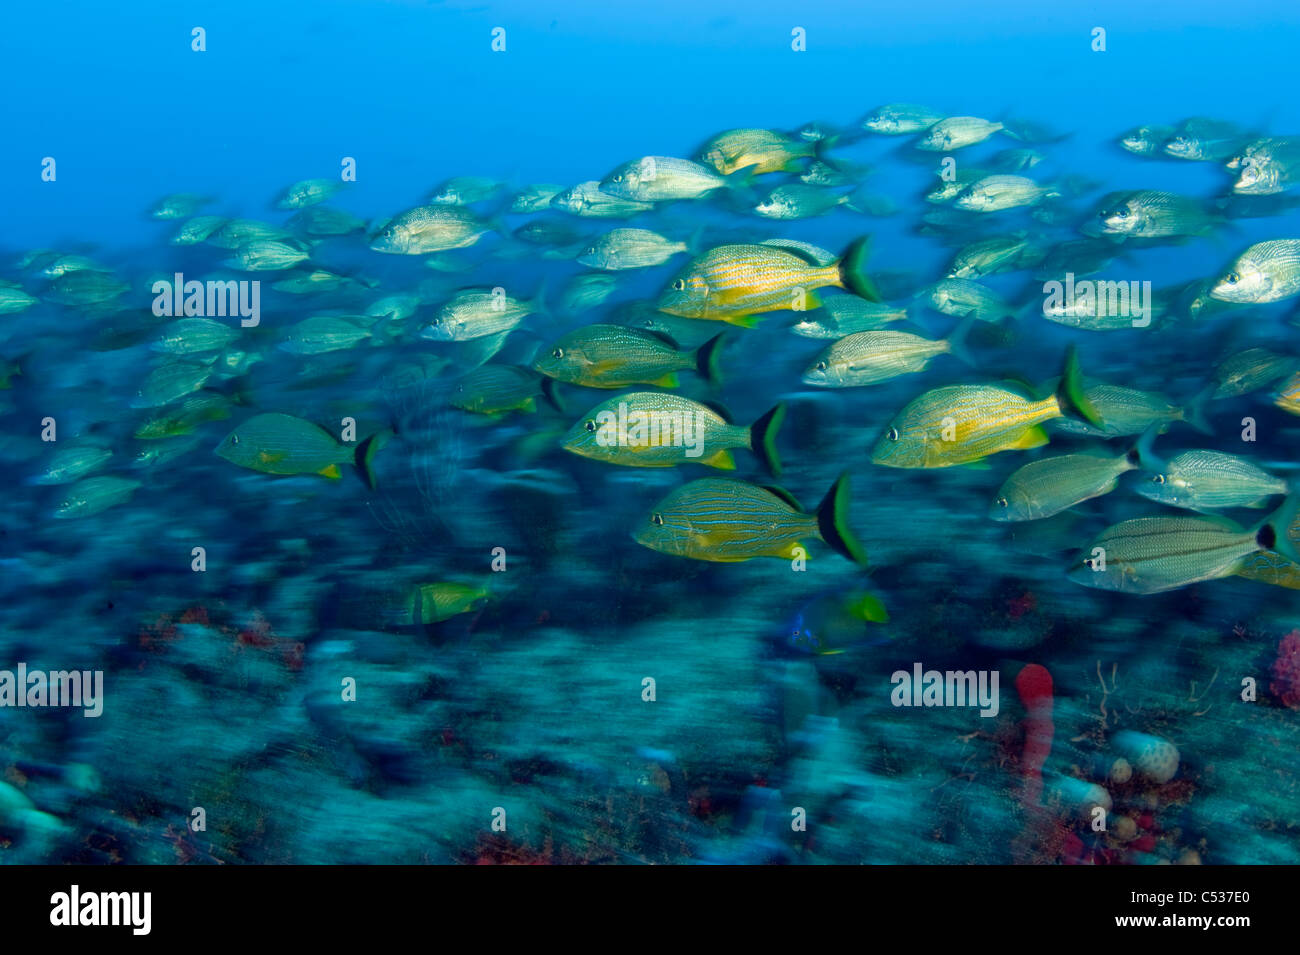 Coral Reef in Palm Beach County, Florida with an assortment of invertebrates and fish species. Stock Photo